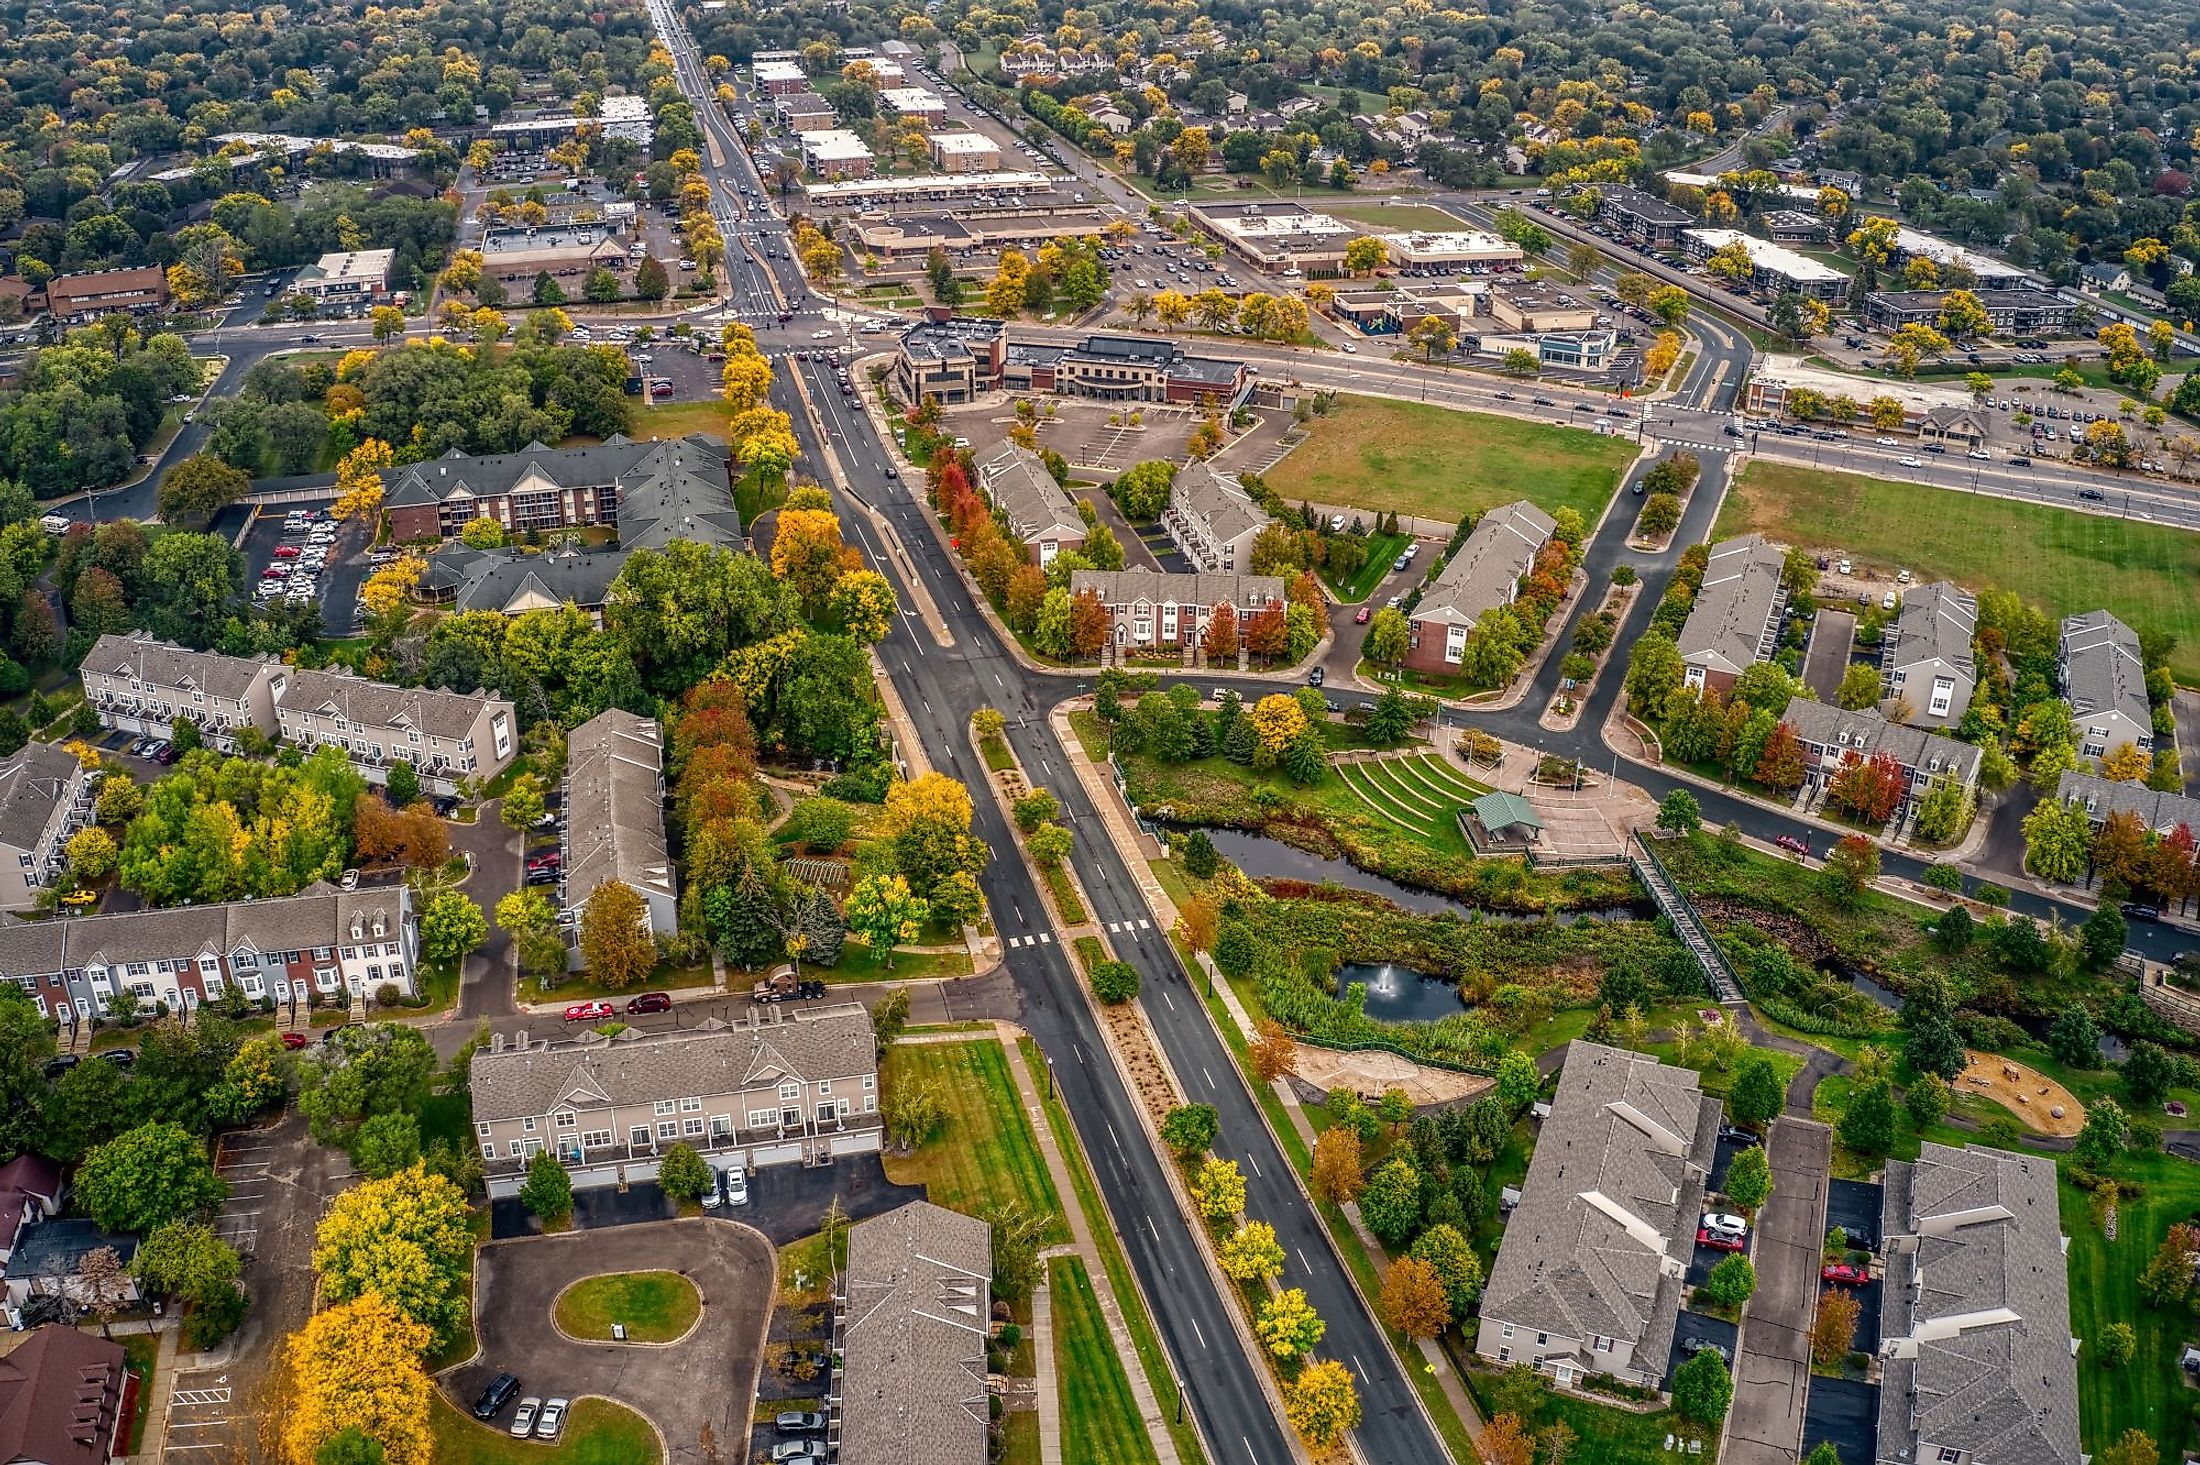 Aerial view of the twin cities suburb of Brooklyn Park, Minnesota